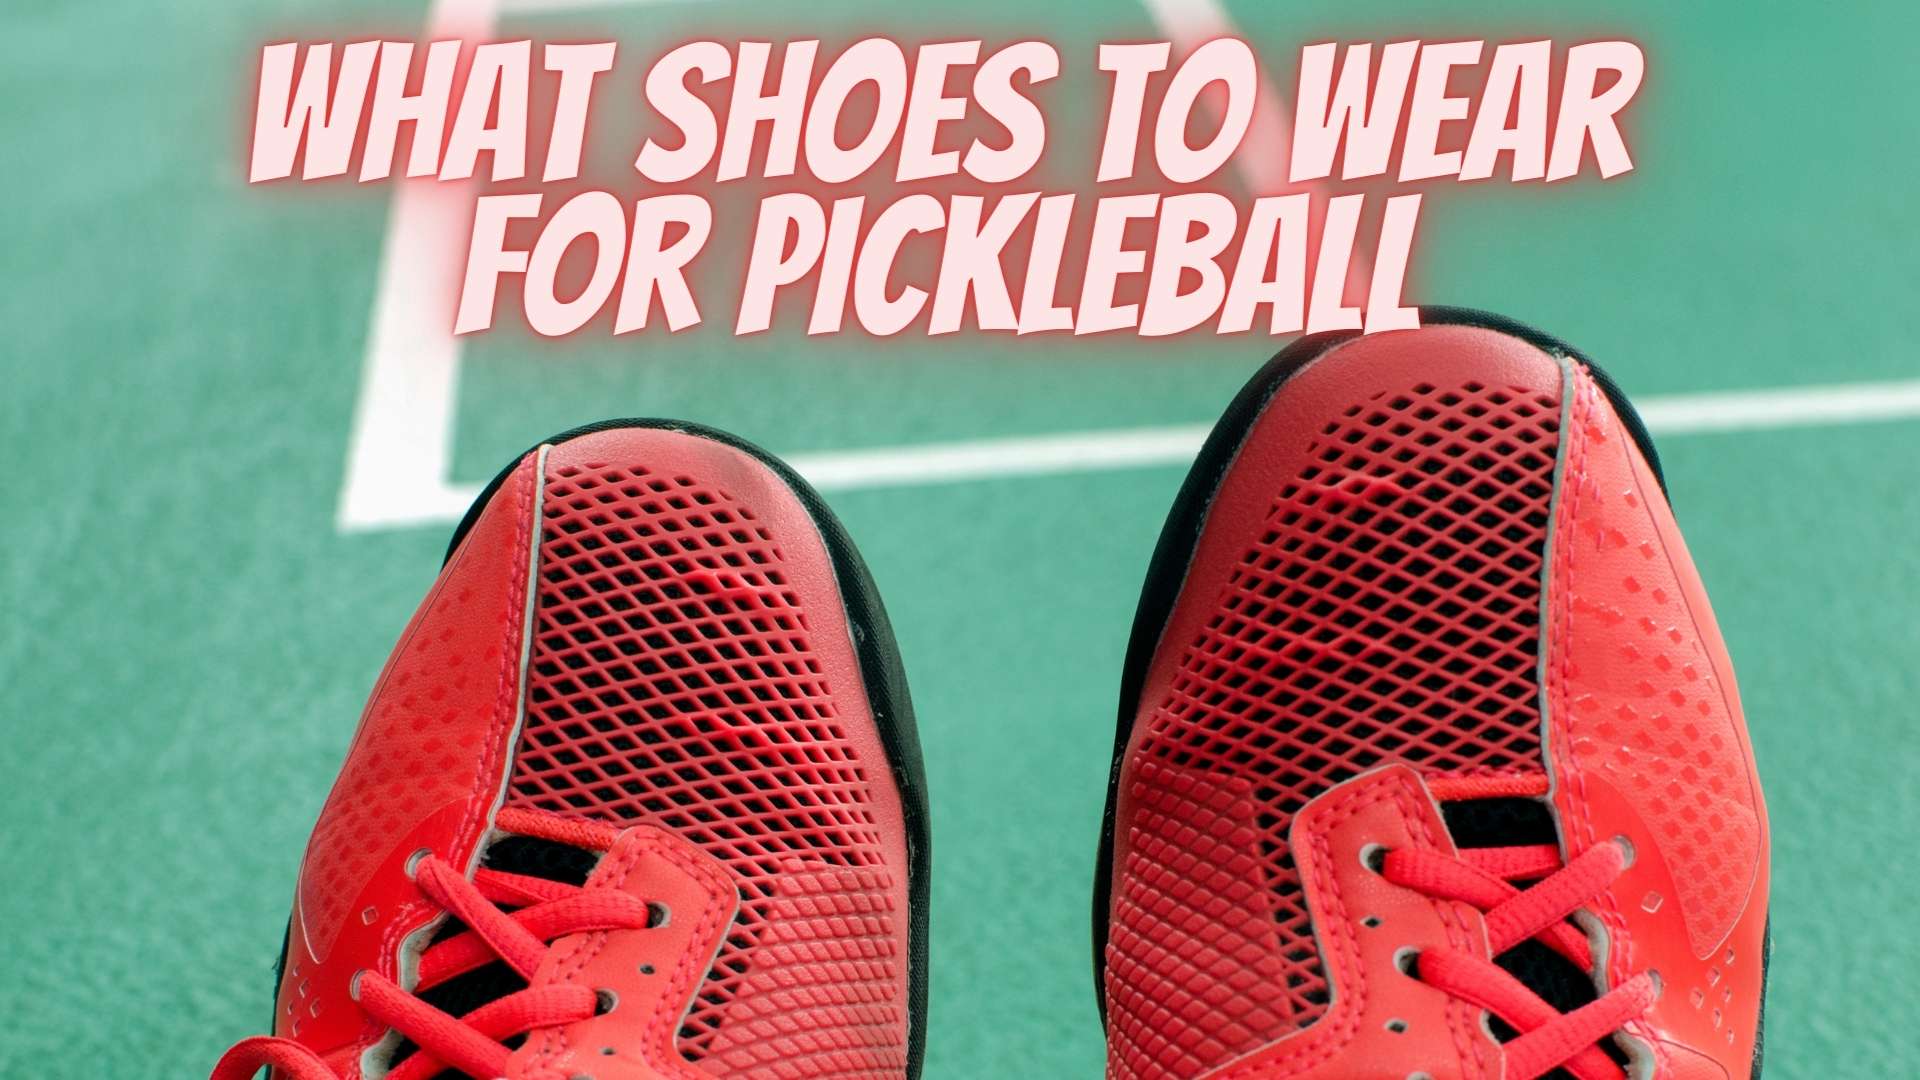 What Shoes To Wear For Pickleball?